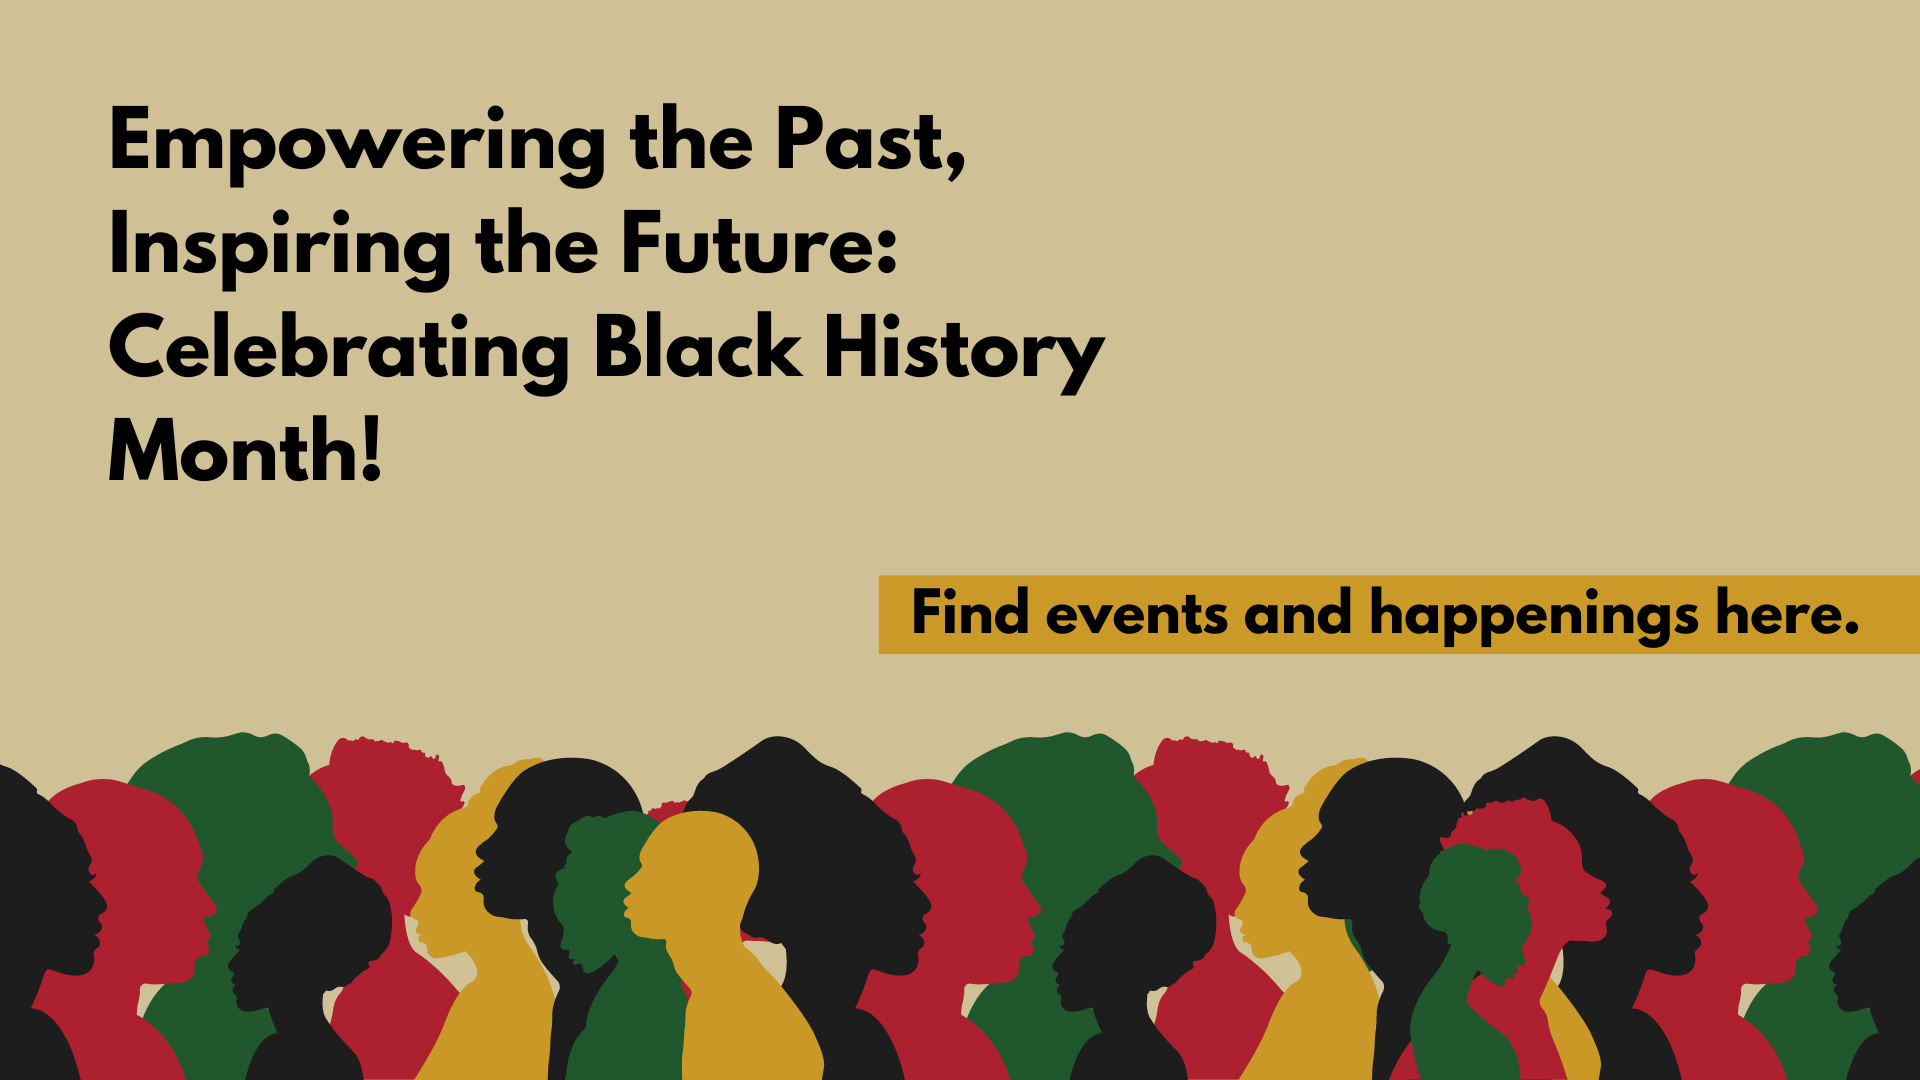 Empowering the Past, Inspiring the Future Celebrating Black Excellence! (2)